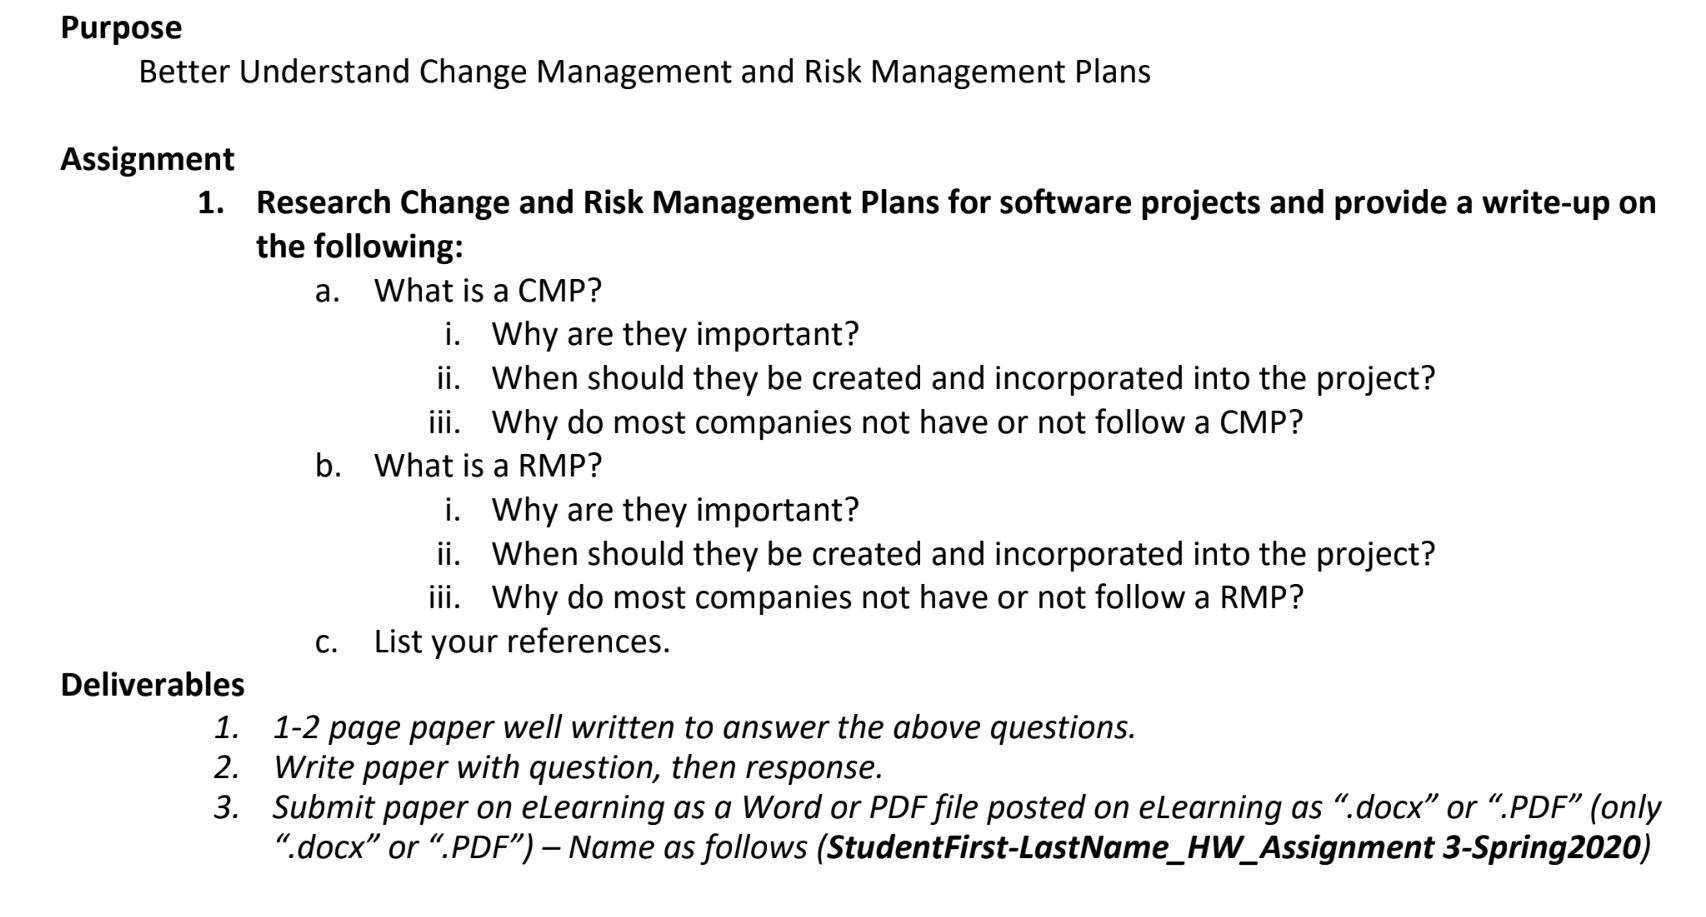 PDF) Studies to Understand The Importance of Risk Management in a